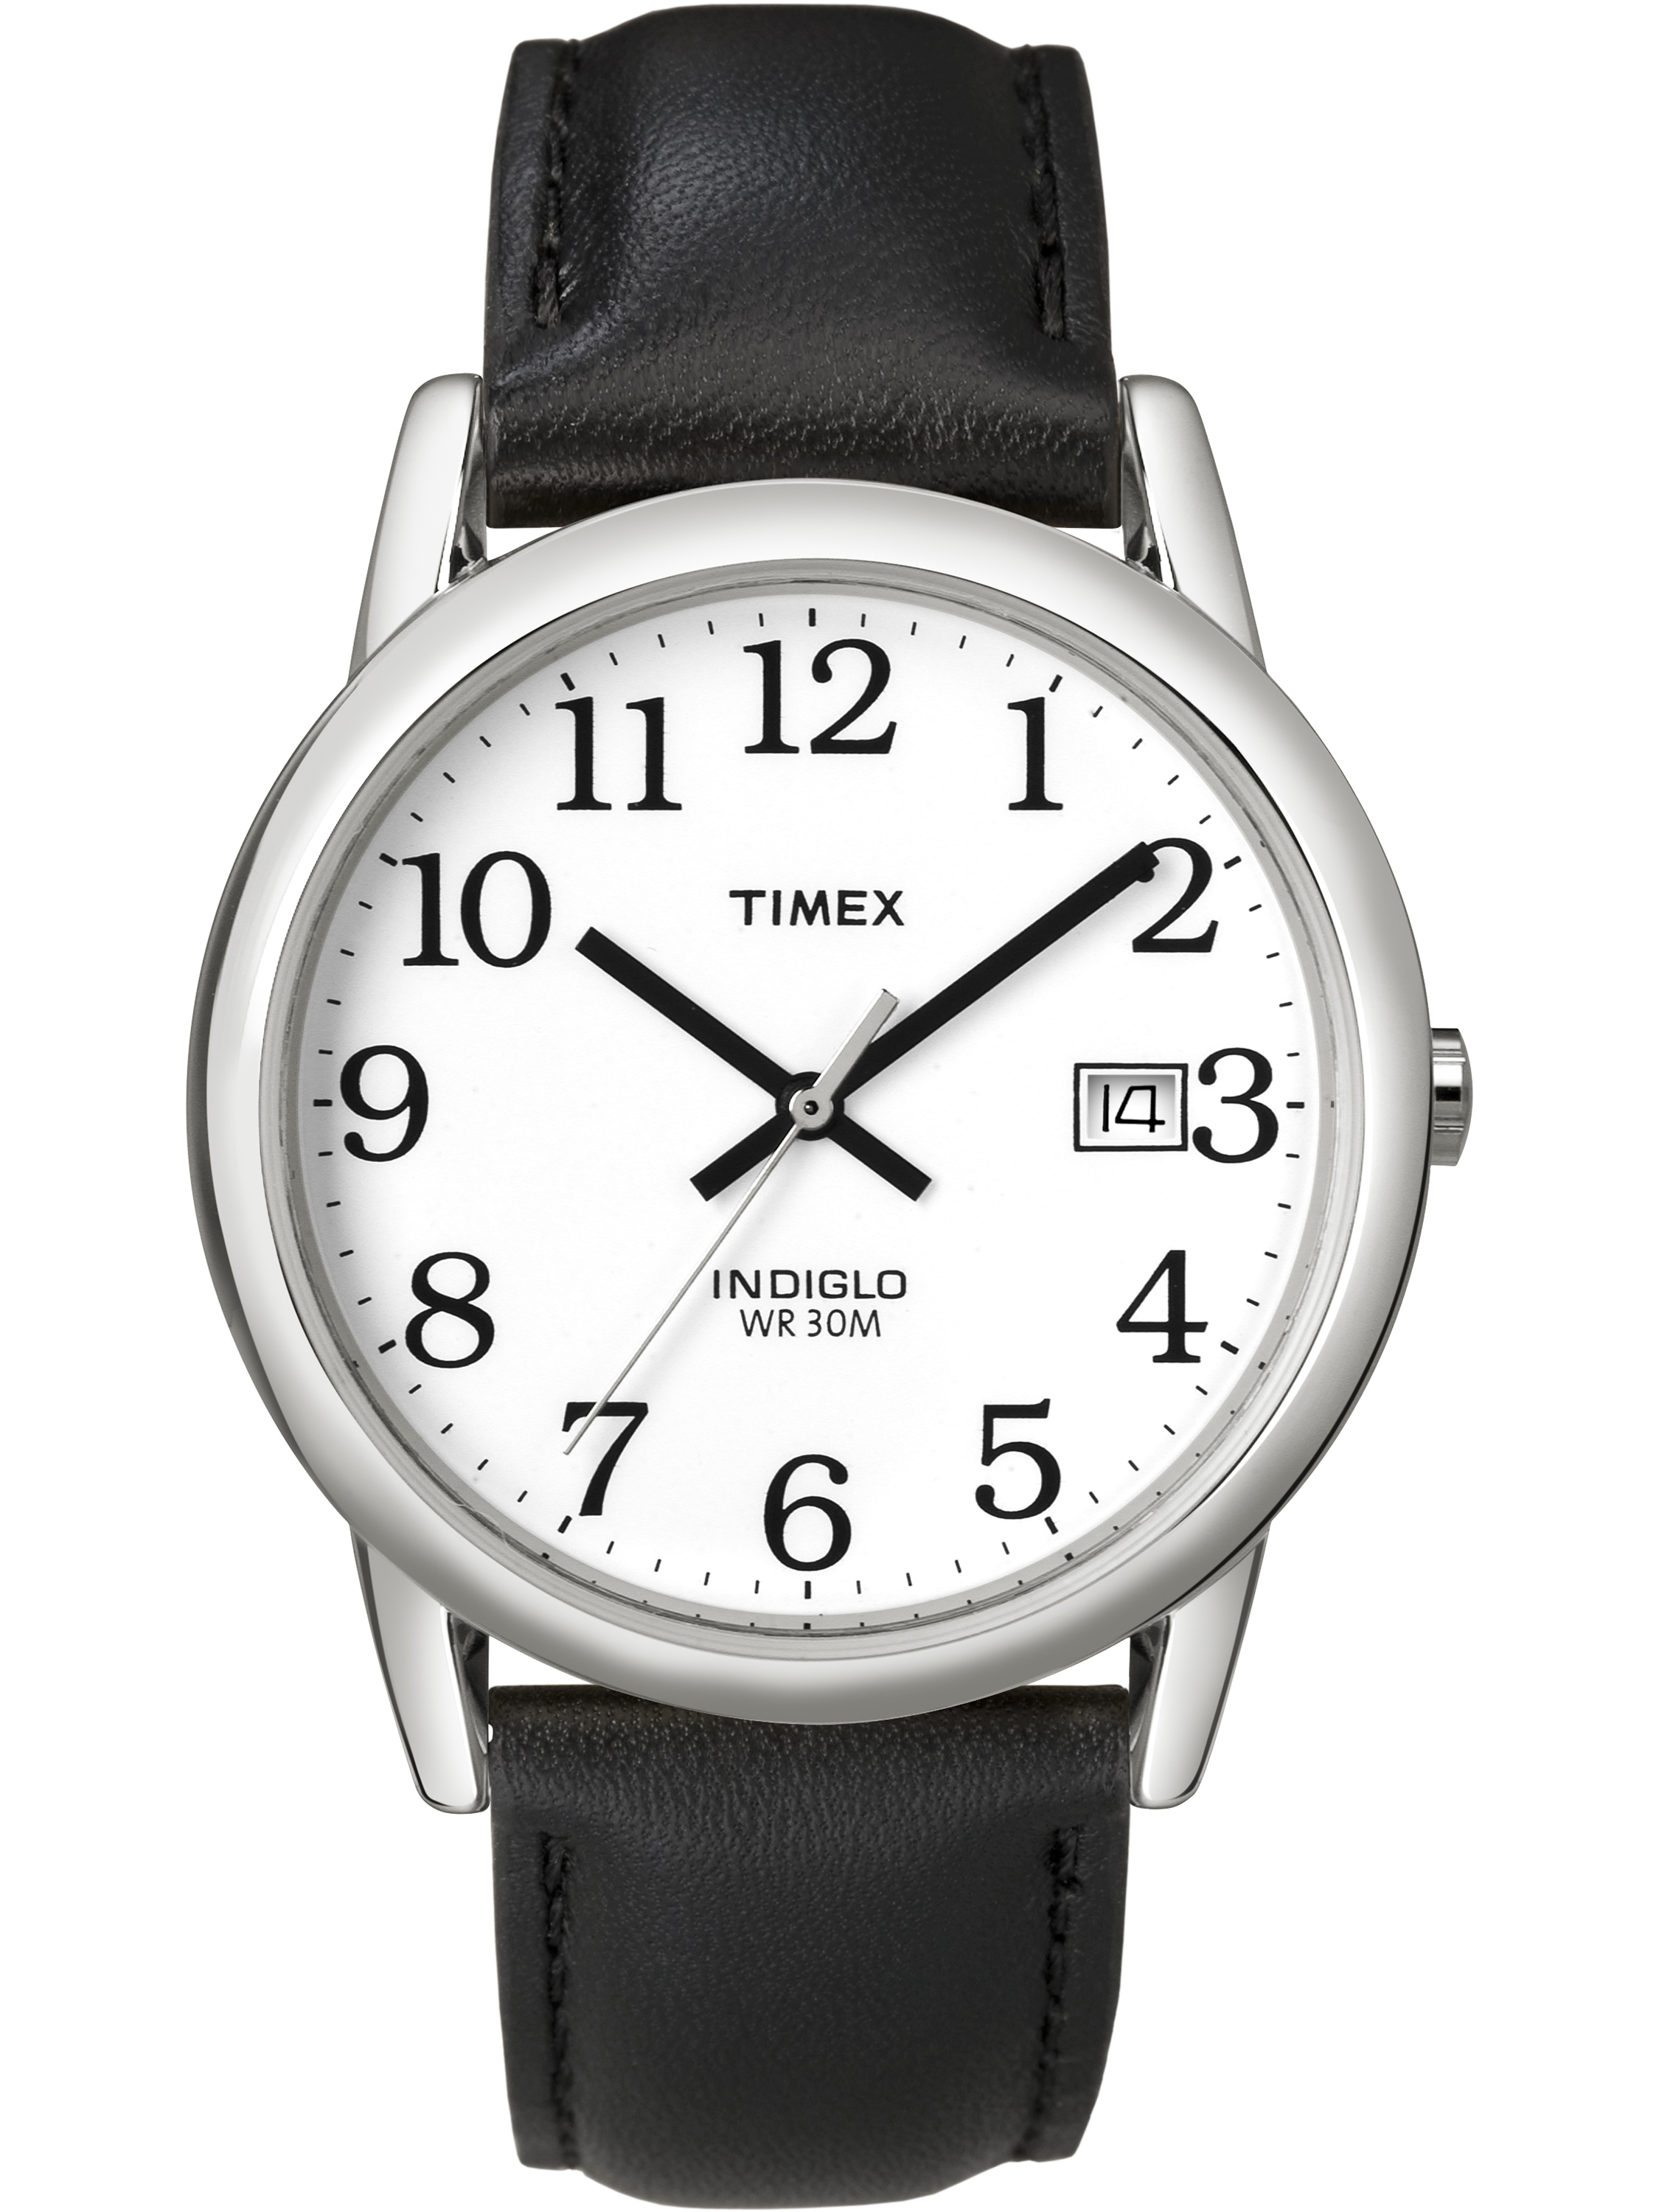 Timex Men's Easy Reader Date Black/Silver/White 35mm Casual Watch, Leather Strap - image 1 of 5